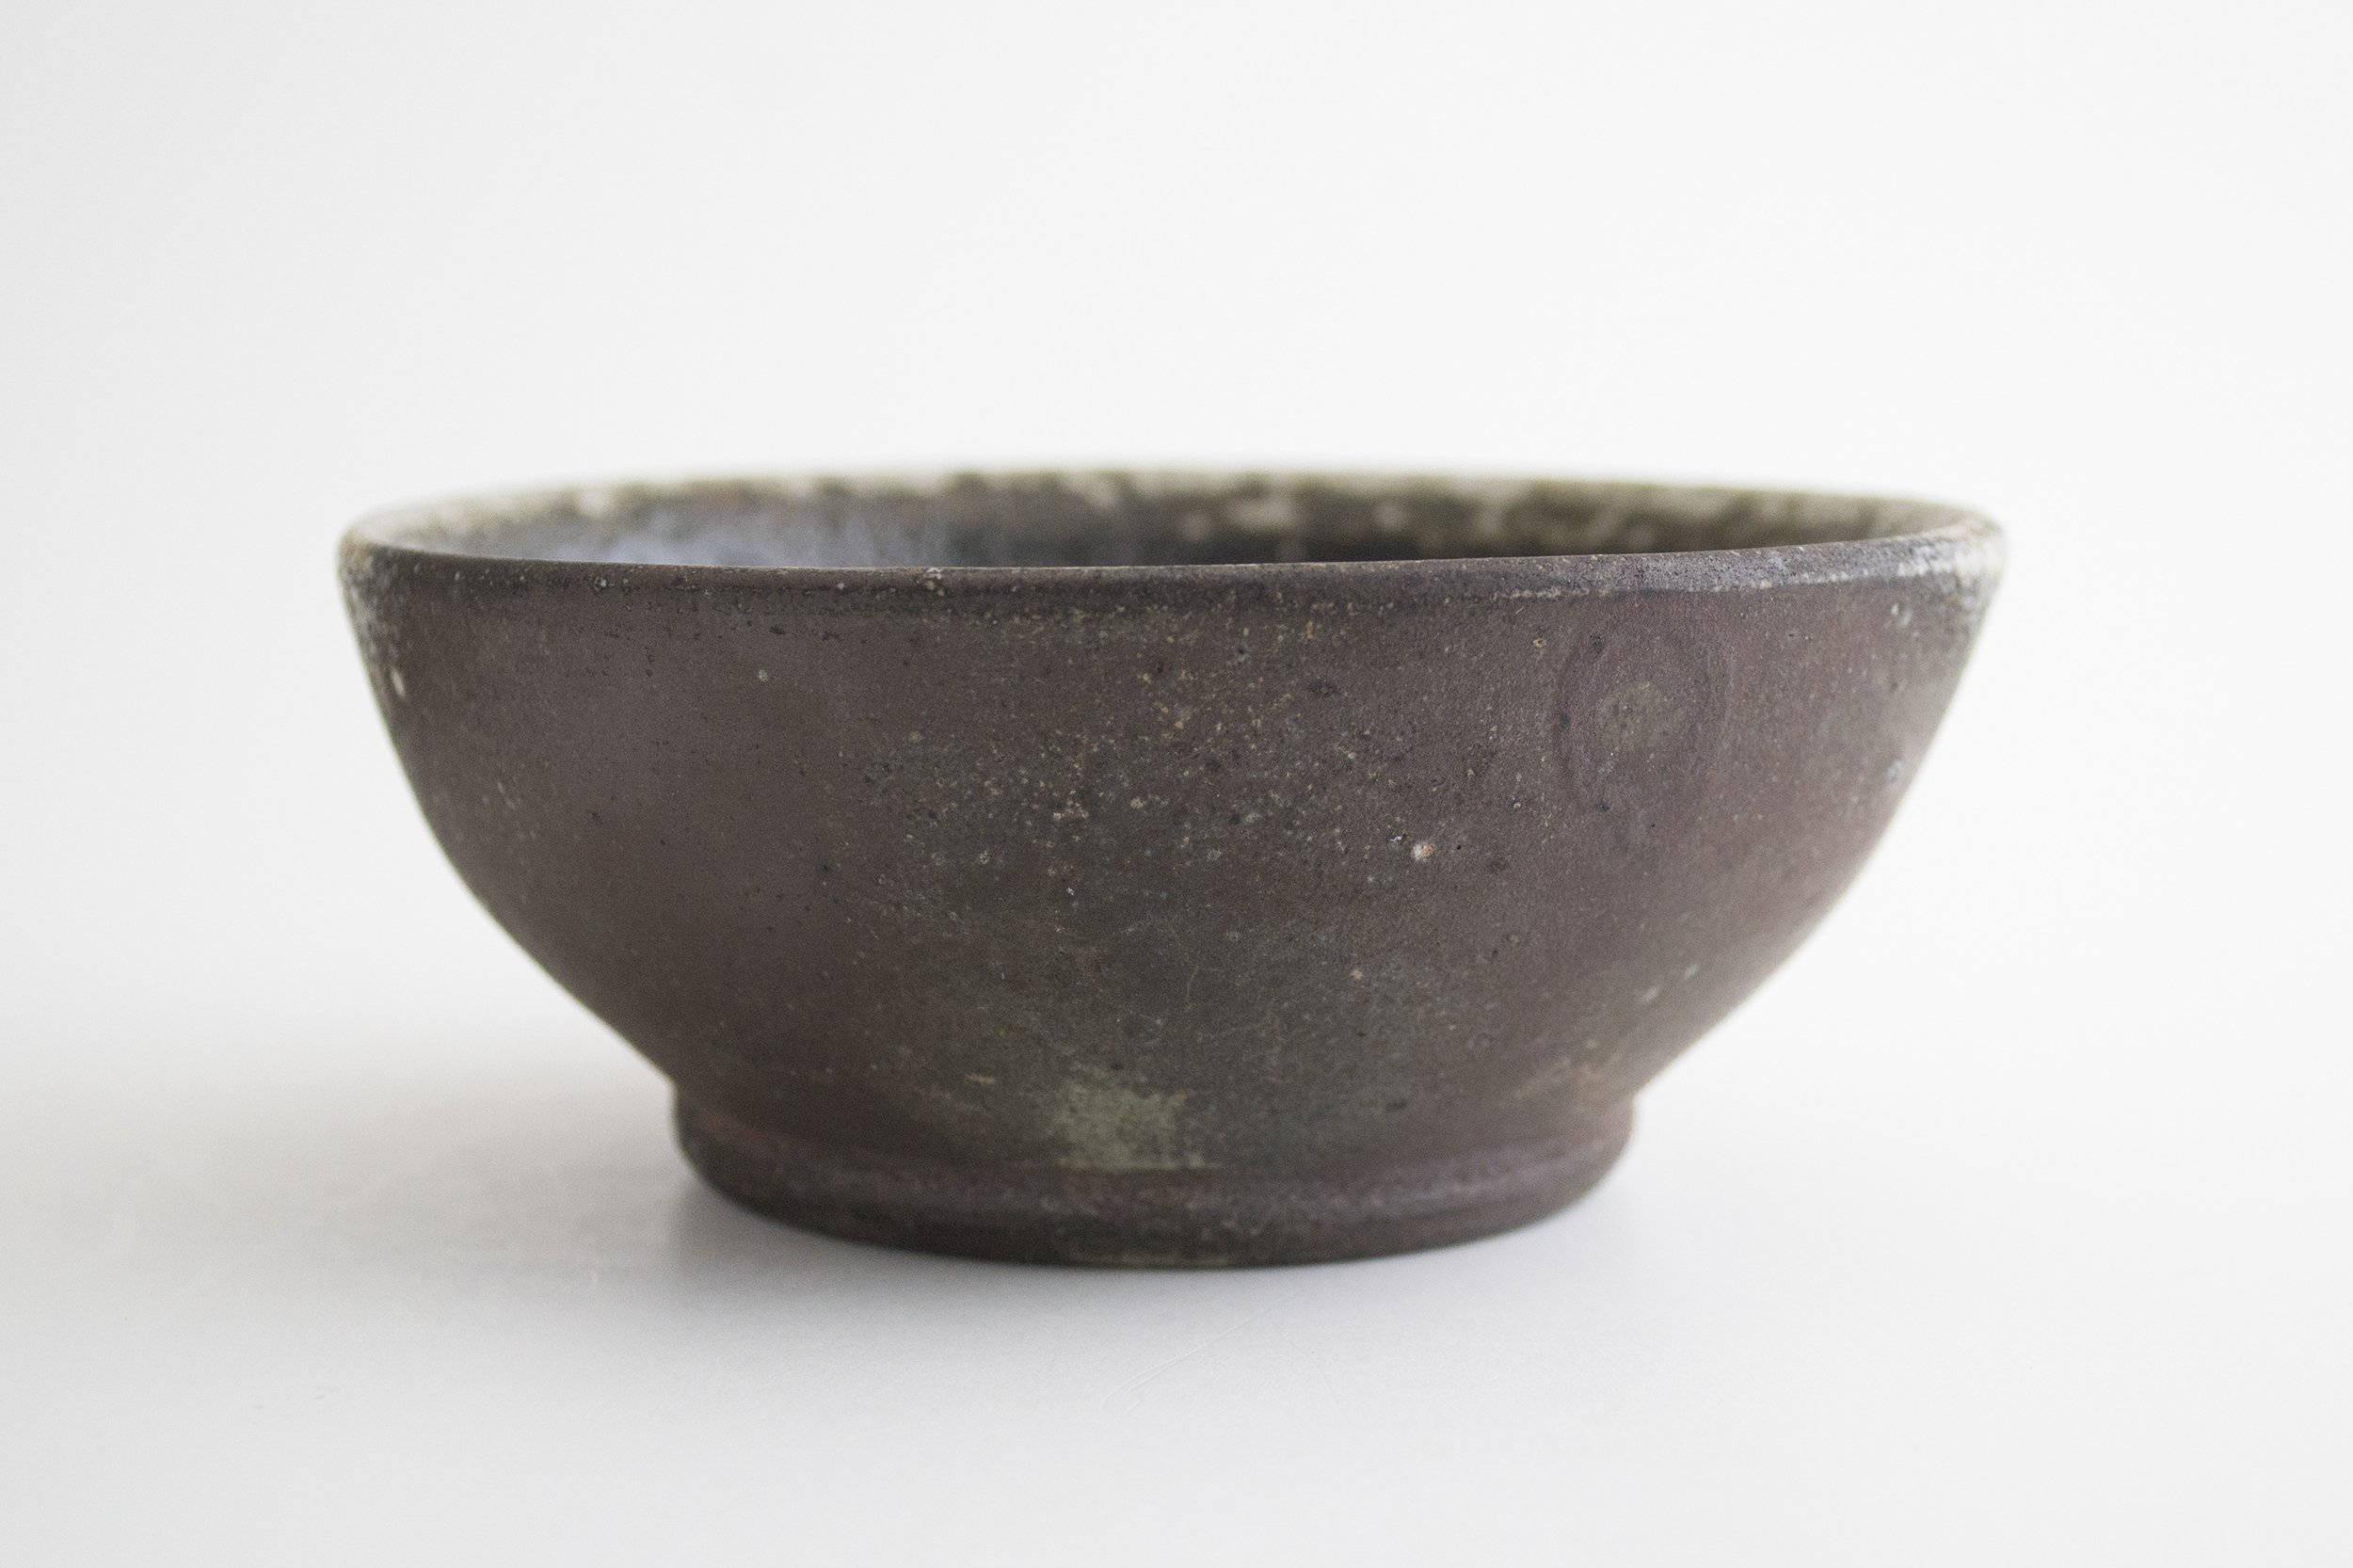 Small thrown bowl with wild clay slip, 2021